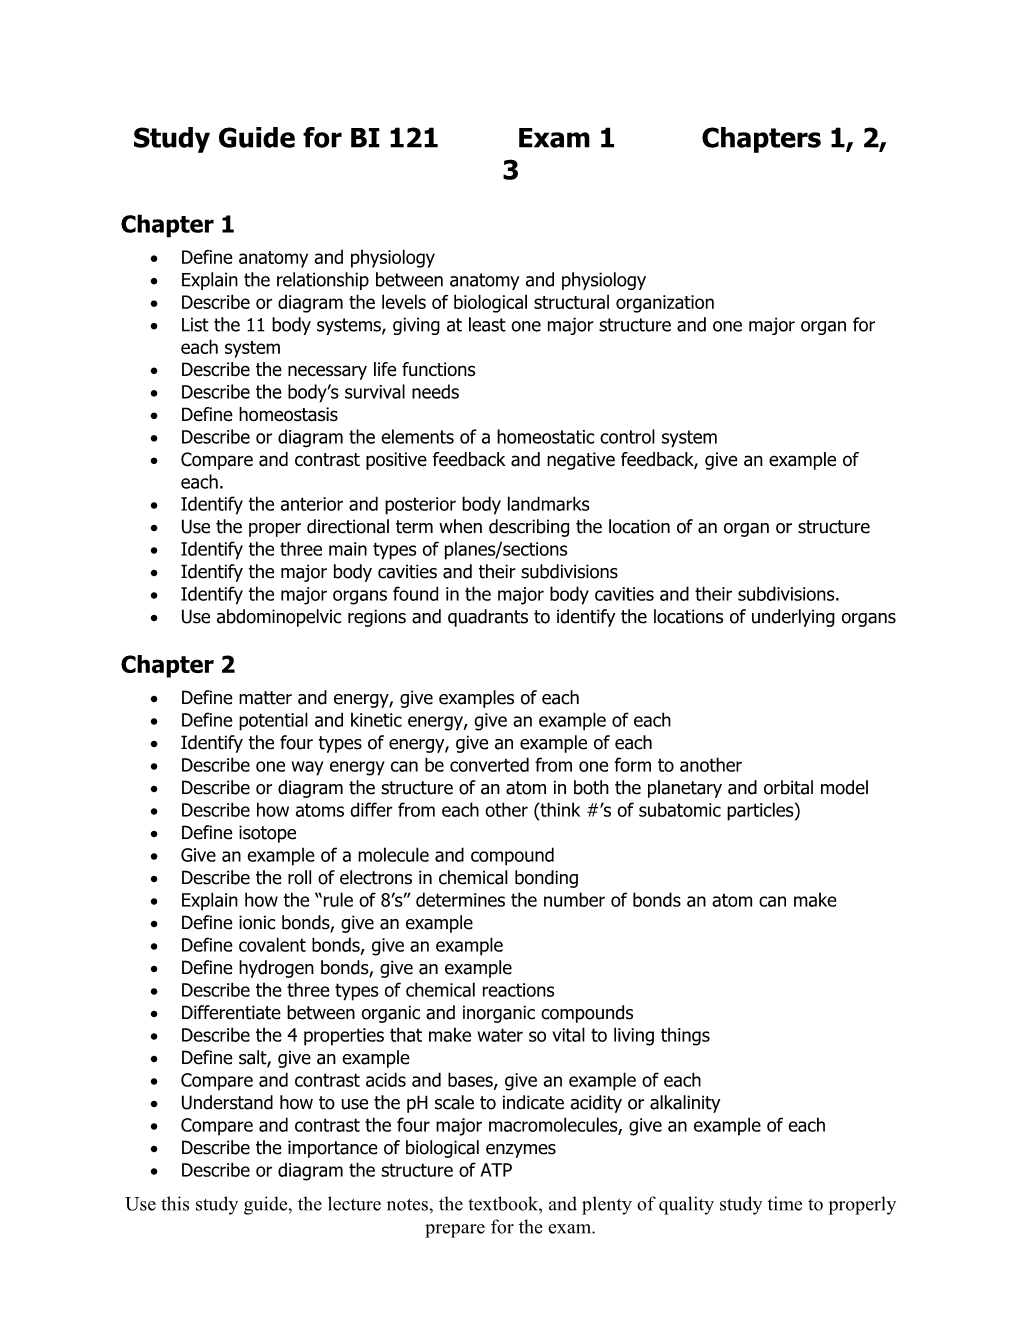 Study Guide for BI 121 Exam 1 Chapters 1, 2, 3